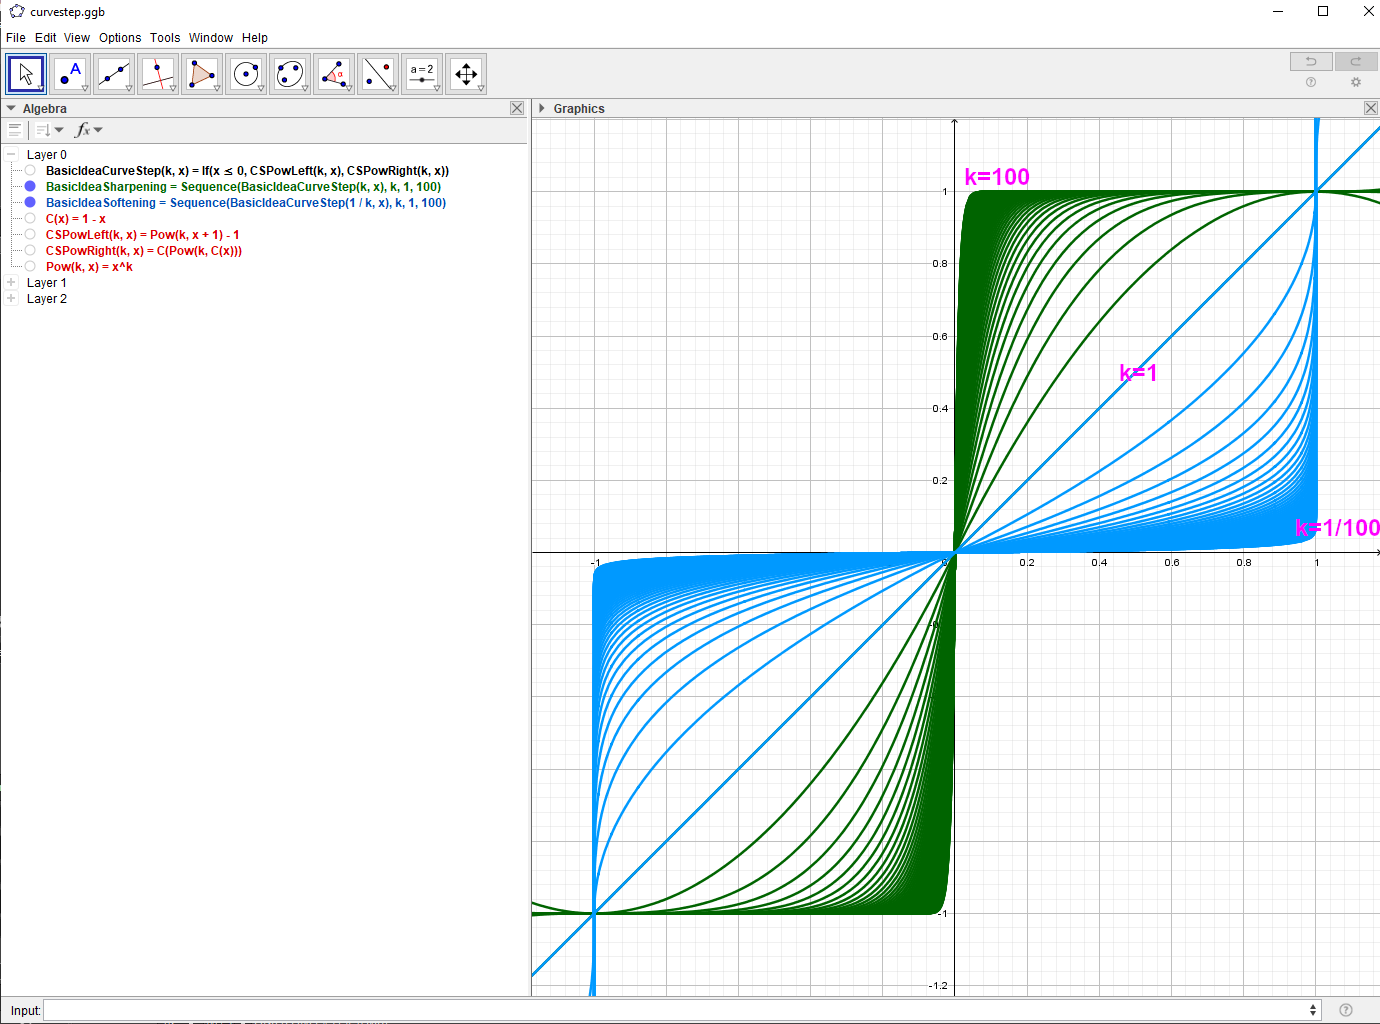 Visualization with Geogebra of a family of curves generated with the function BasicIdeaCurveStep, showing how the k parameter affects smoothing and sharpening